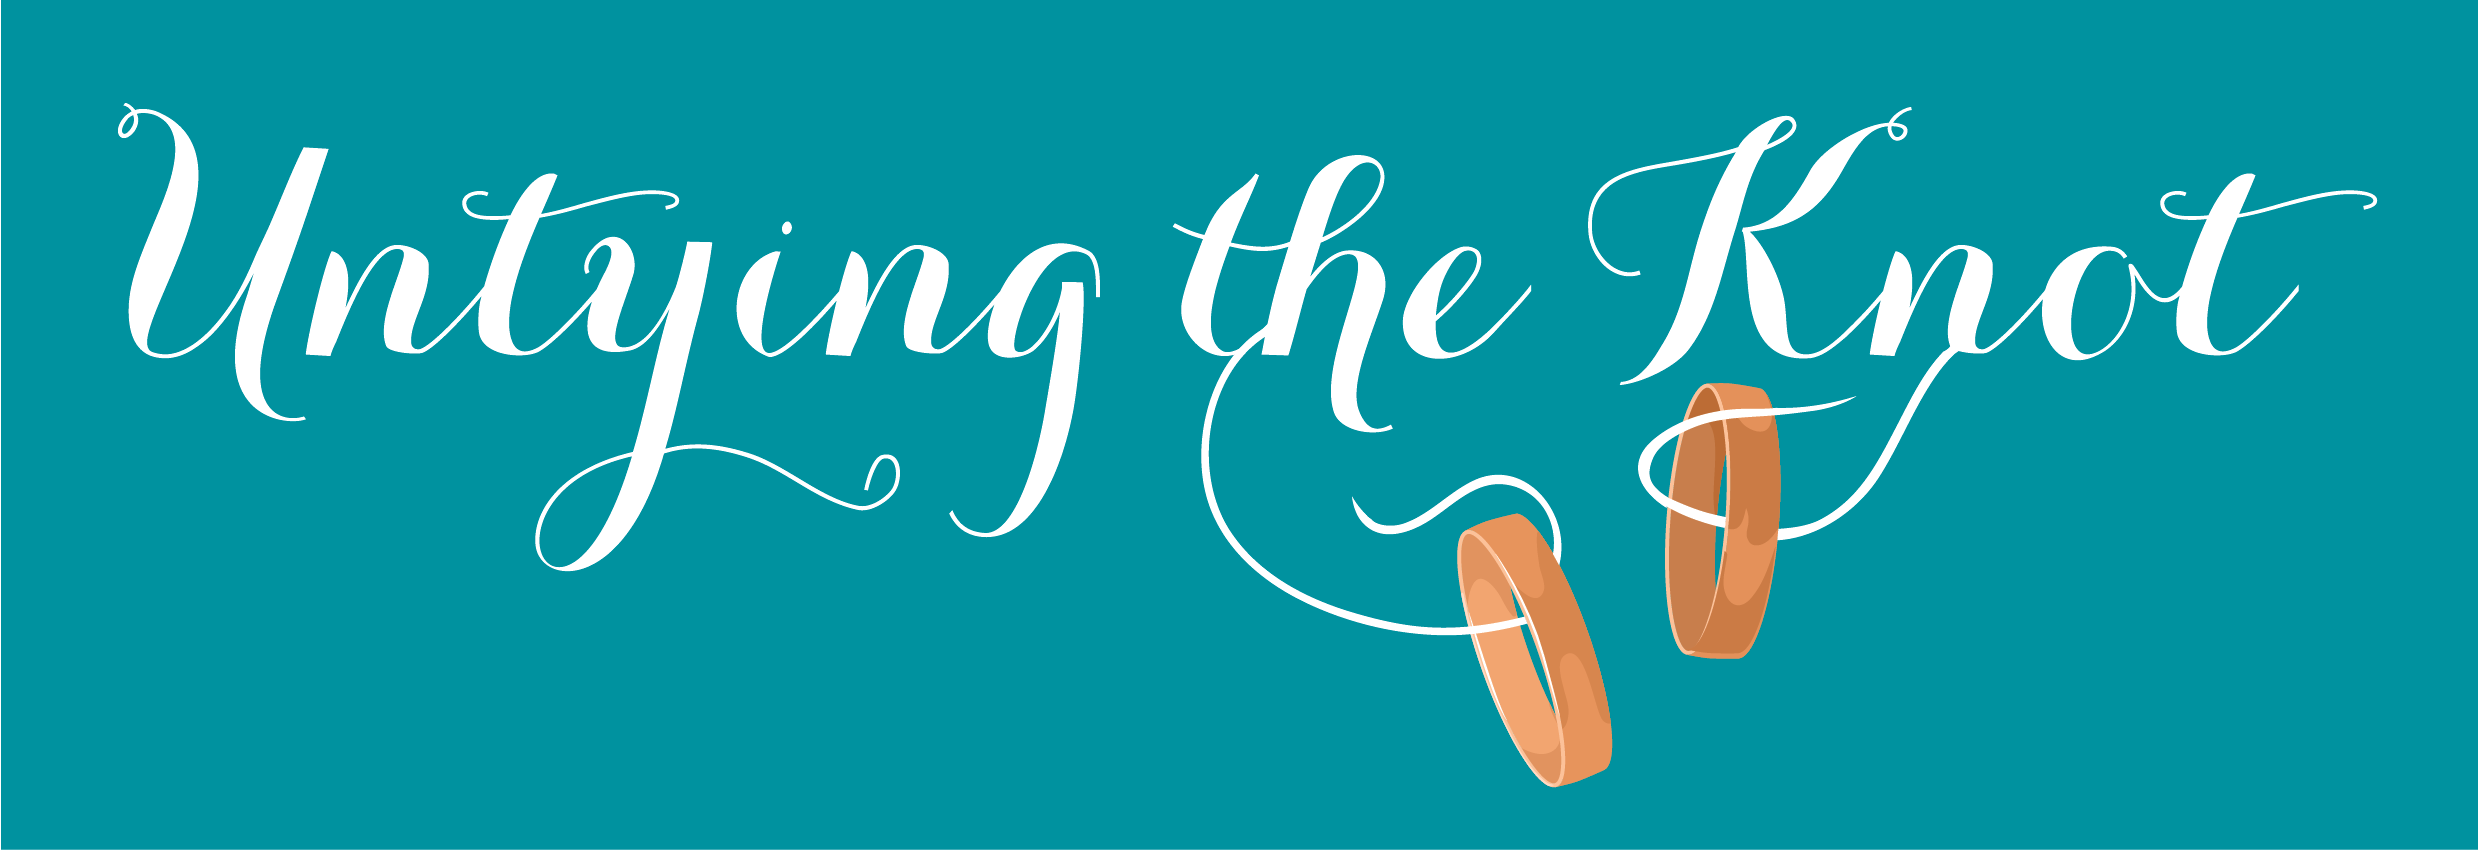 Untying The Knot